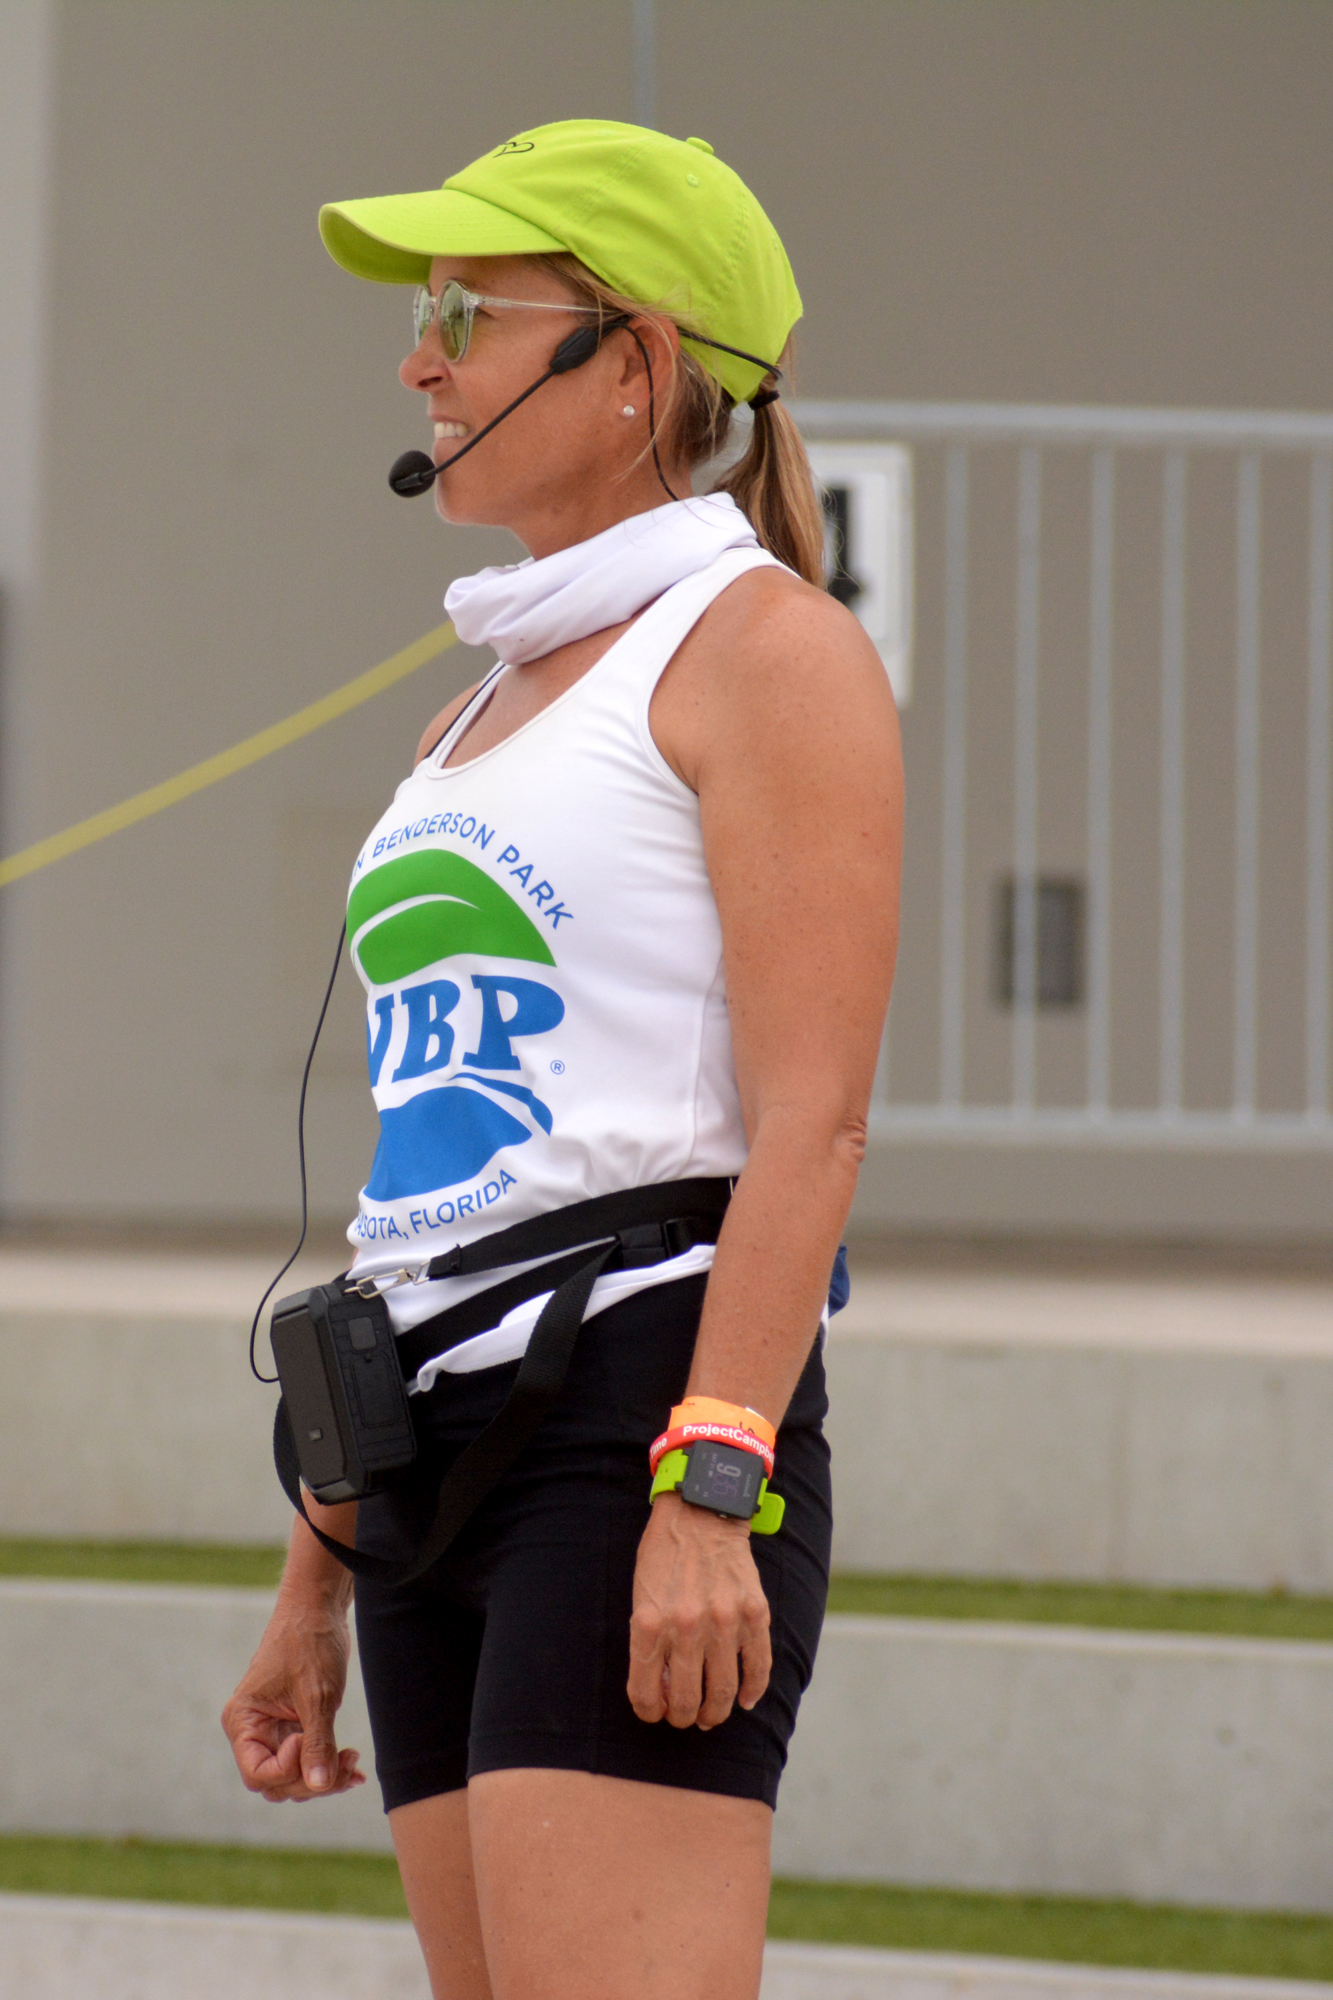 Angela Long helped start Survivors in Sync at Benderson Park in 2013 and, after starting as a paddler, has become the park's head paddling coach. Paddlers praise Long's compassion for her athletes and her passion for the sport.